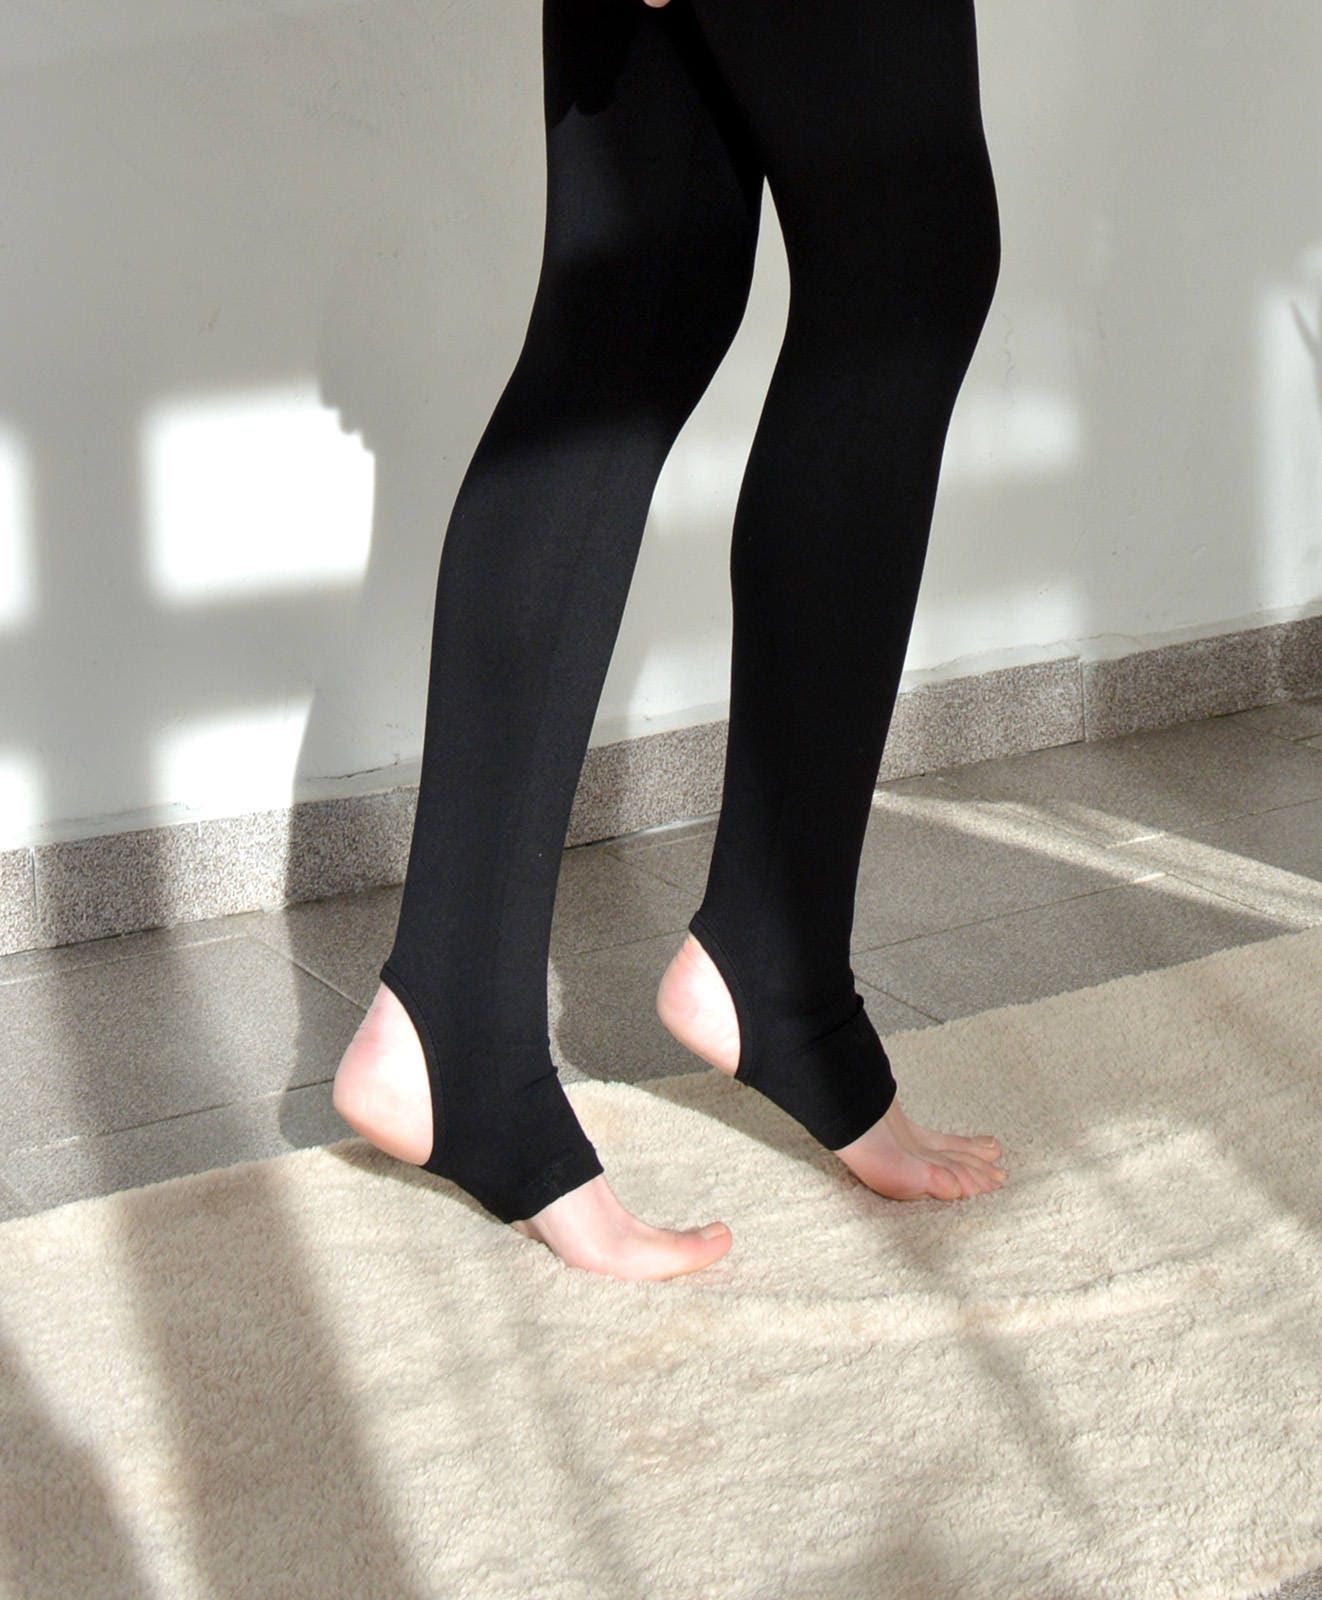 High Waisted Leggings With Heel Hole/ High Waist Black Leggings. Express  Shipping With DHL -  Denmark